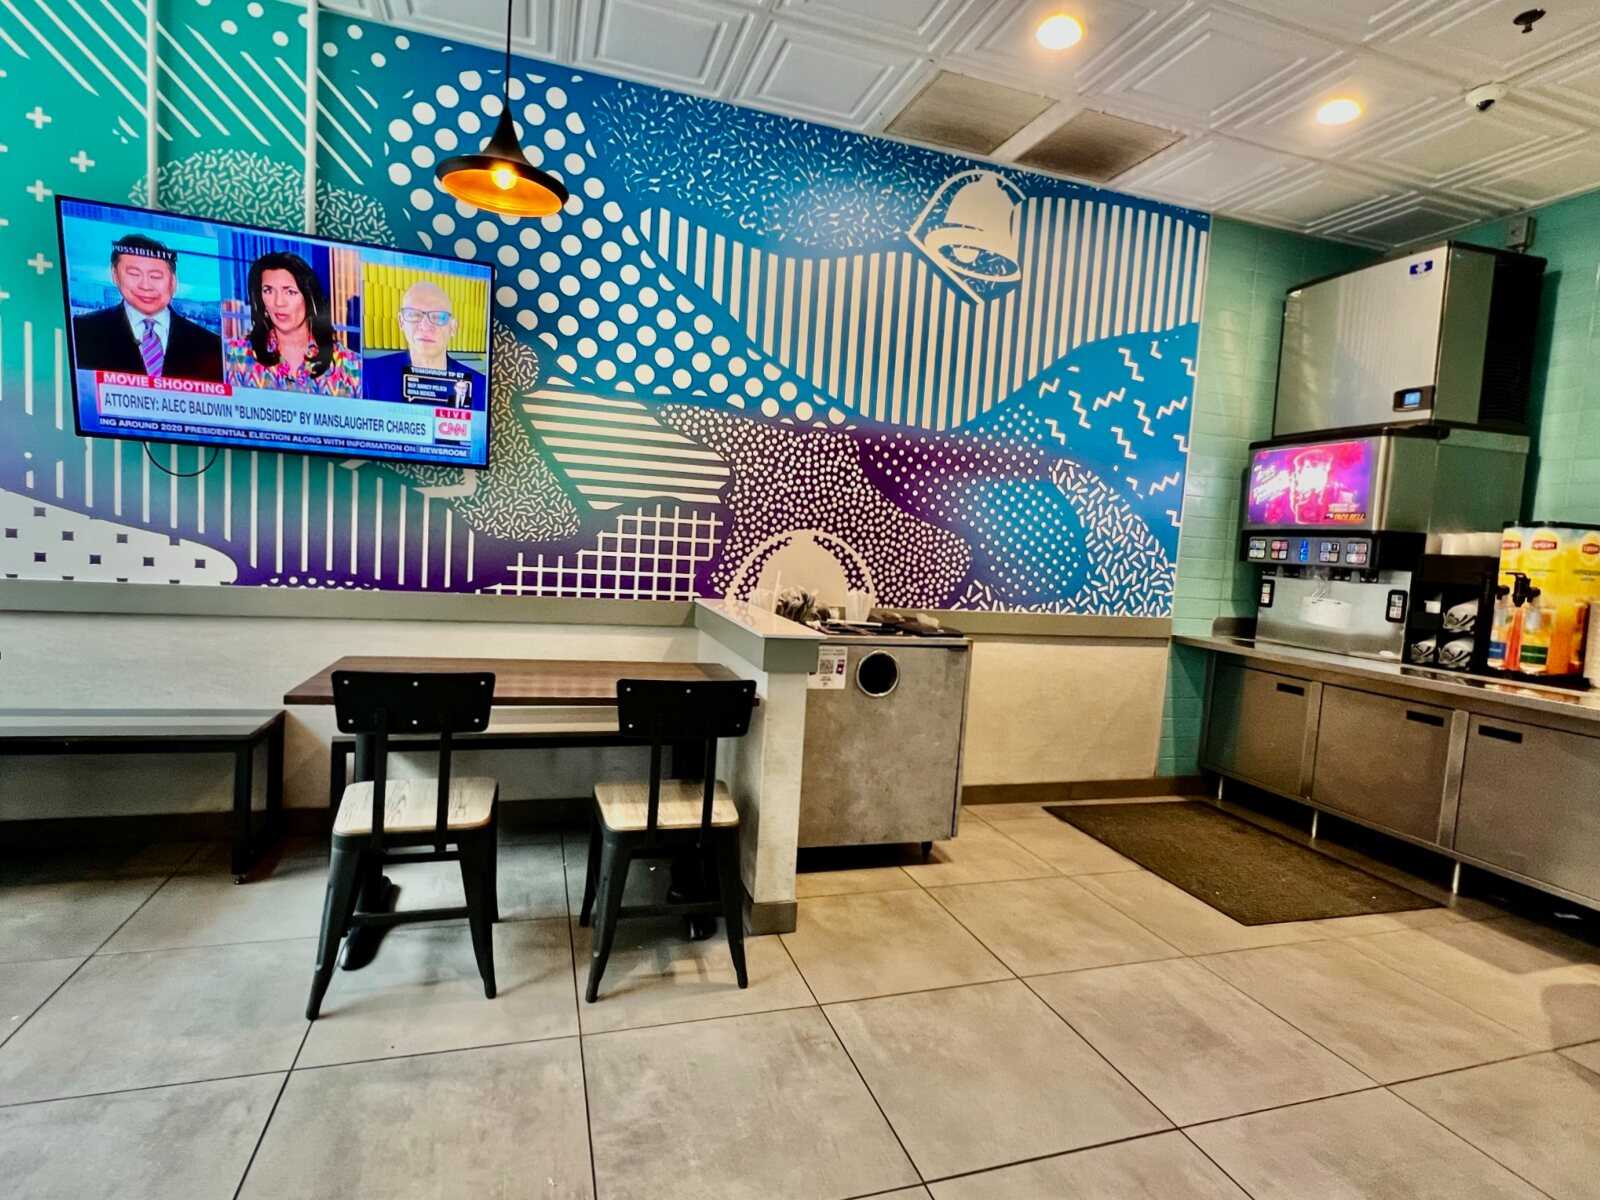 Taco Bell Cantina Review